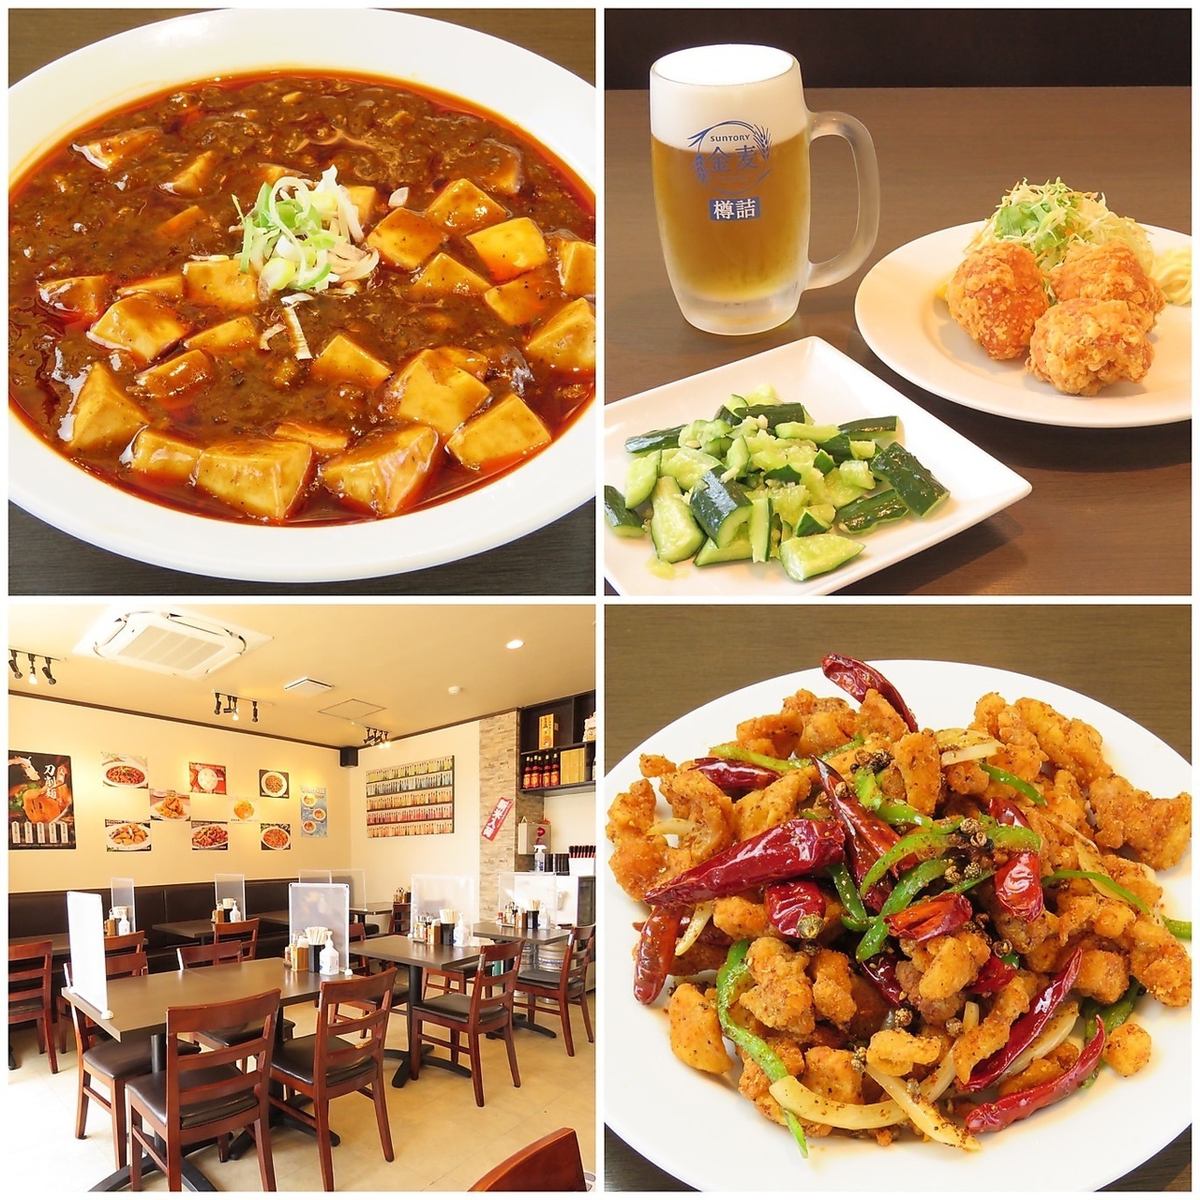 A variety of authentic Chinese dishes to enjoy in Tsuruse, such as mapo tofu and sword-cut noodles!